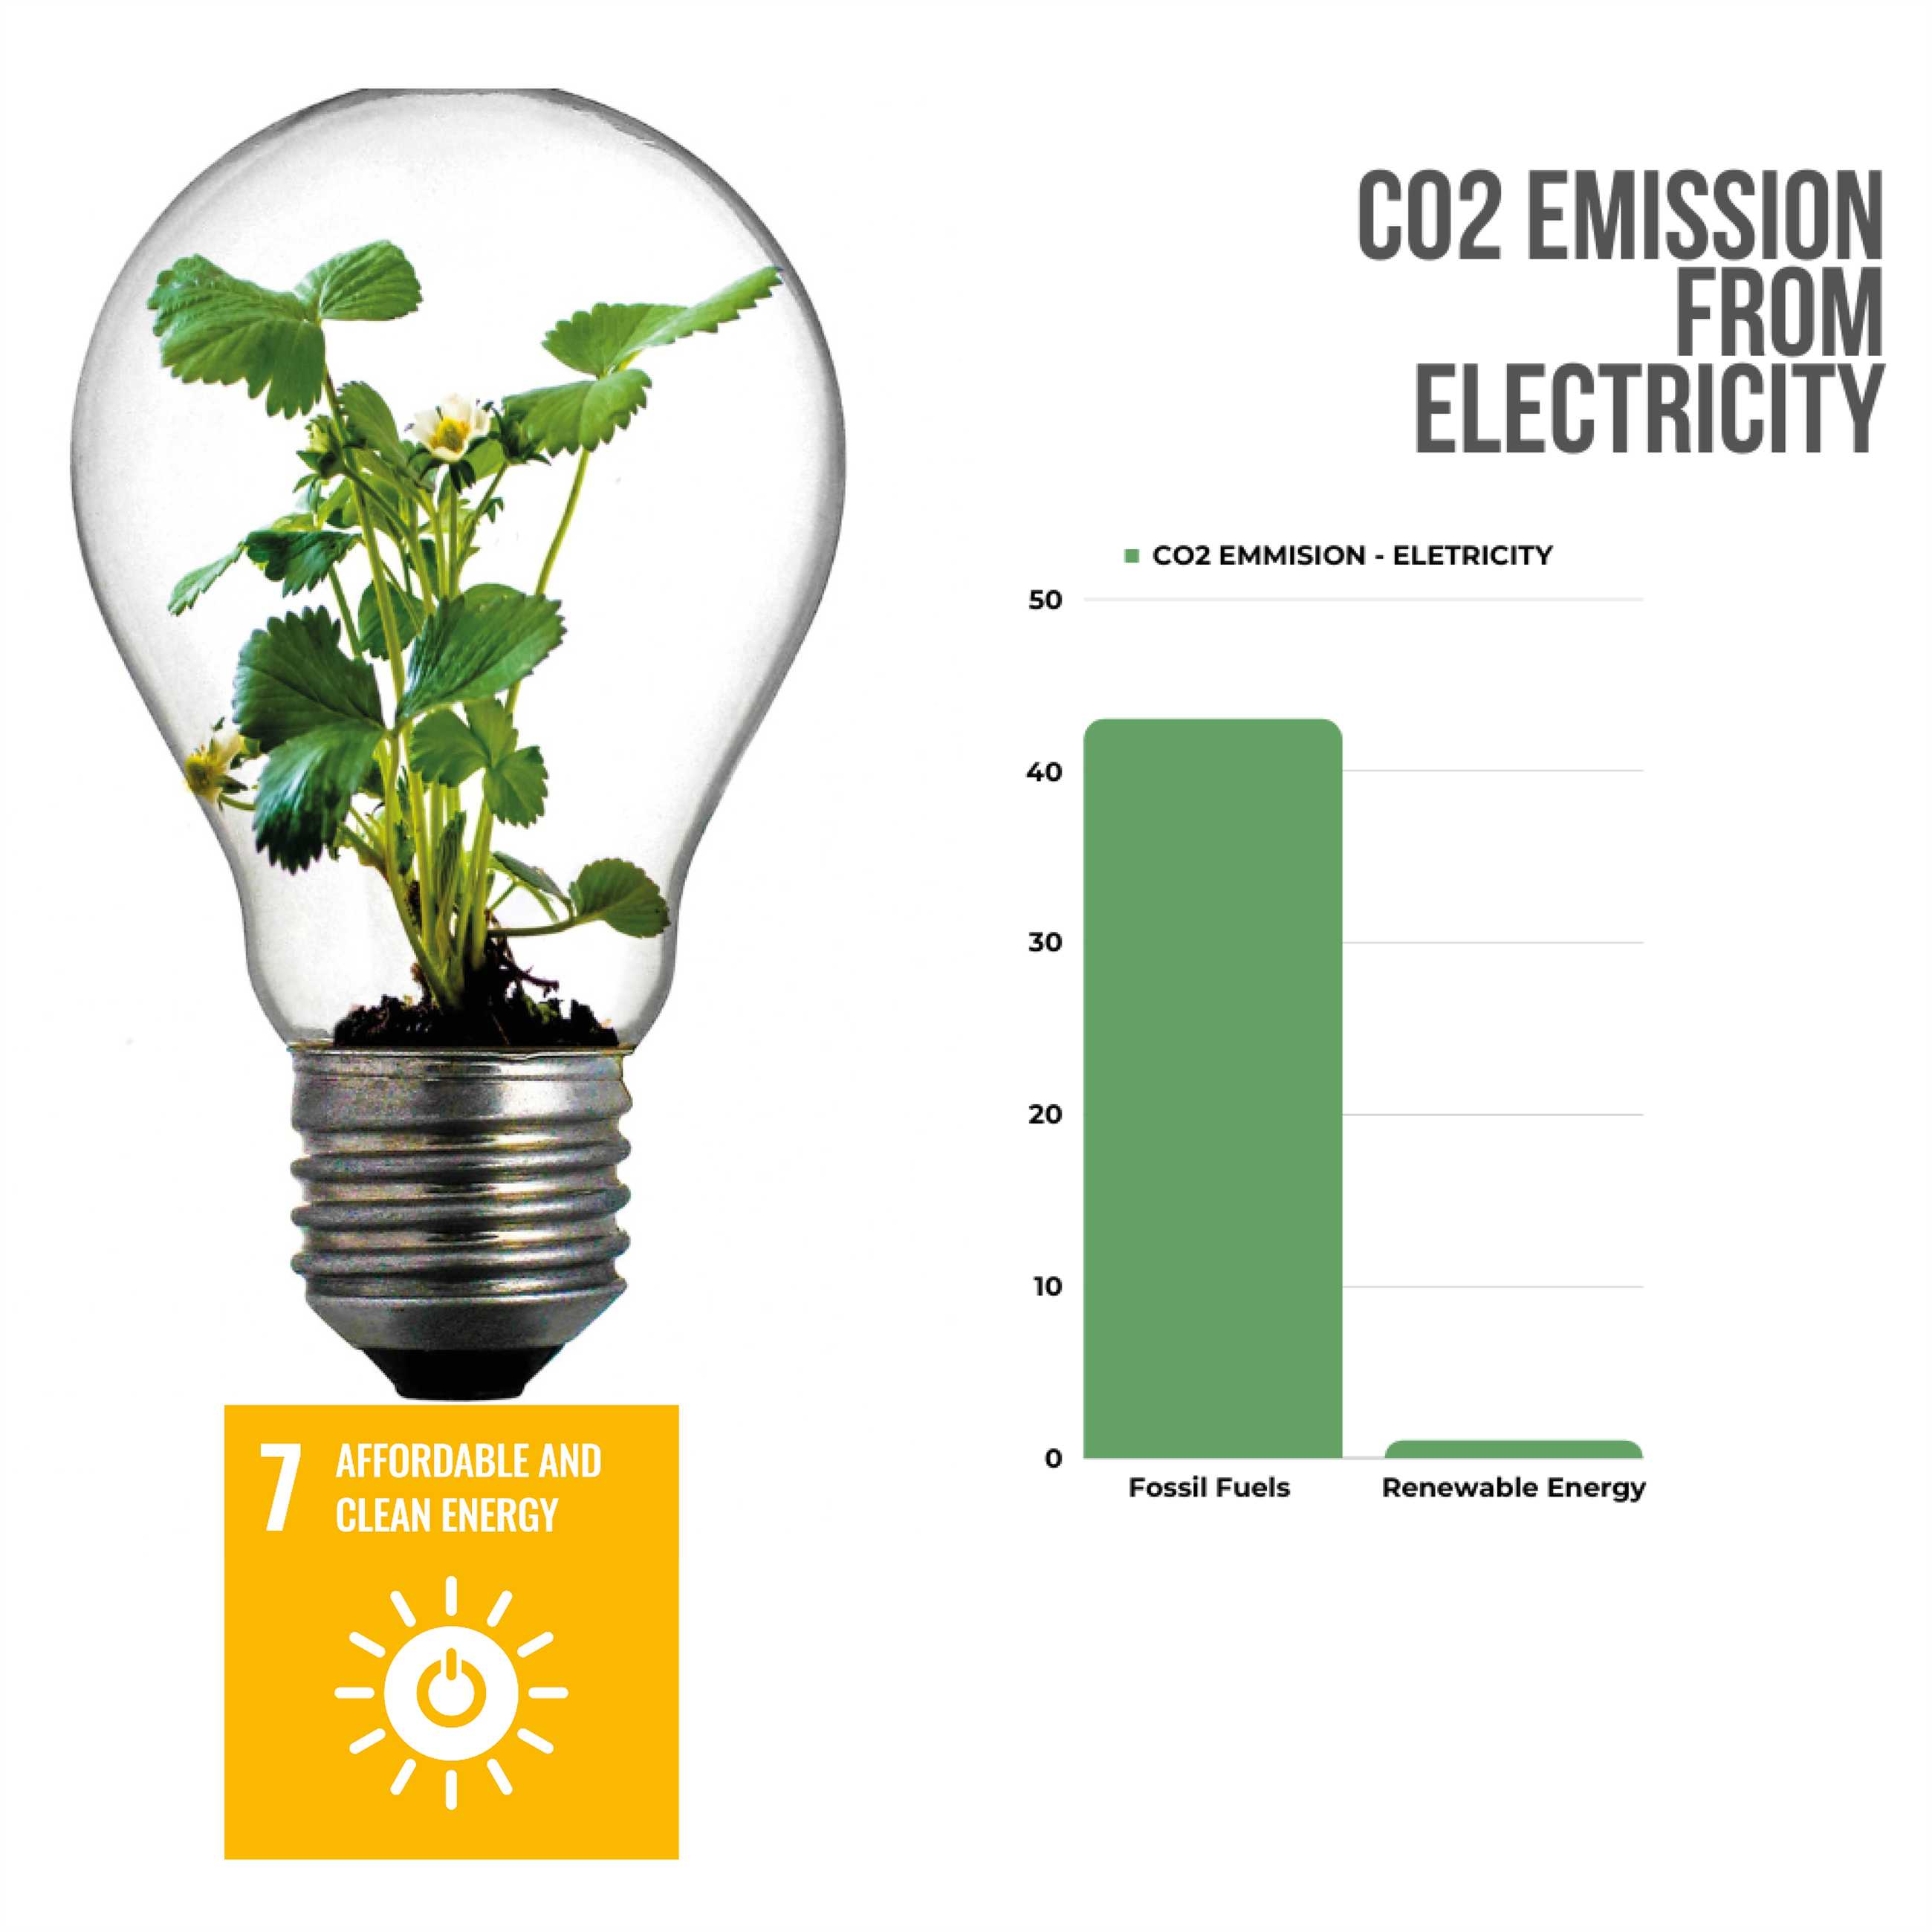 sdg7_co2emissionfromelectricity